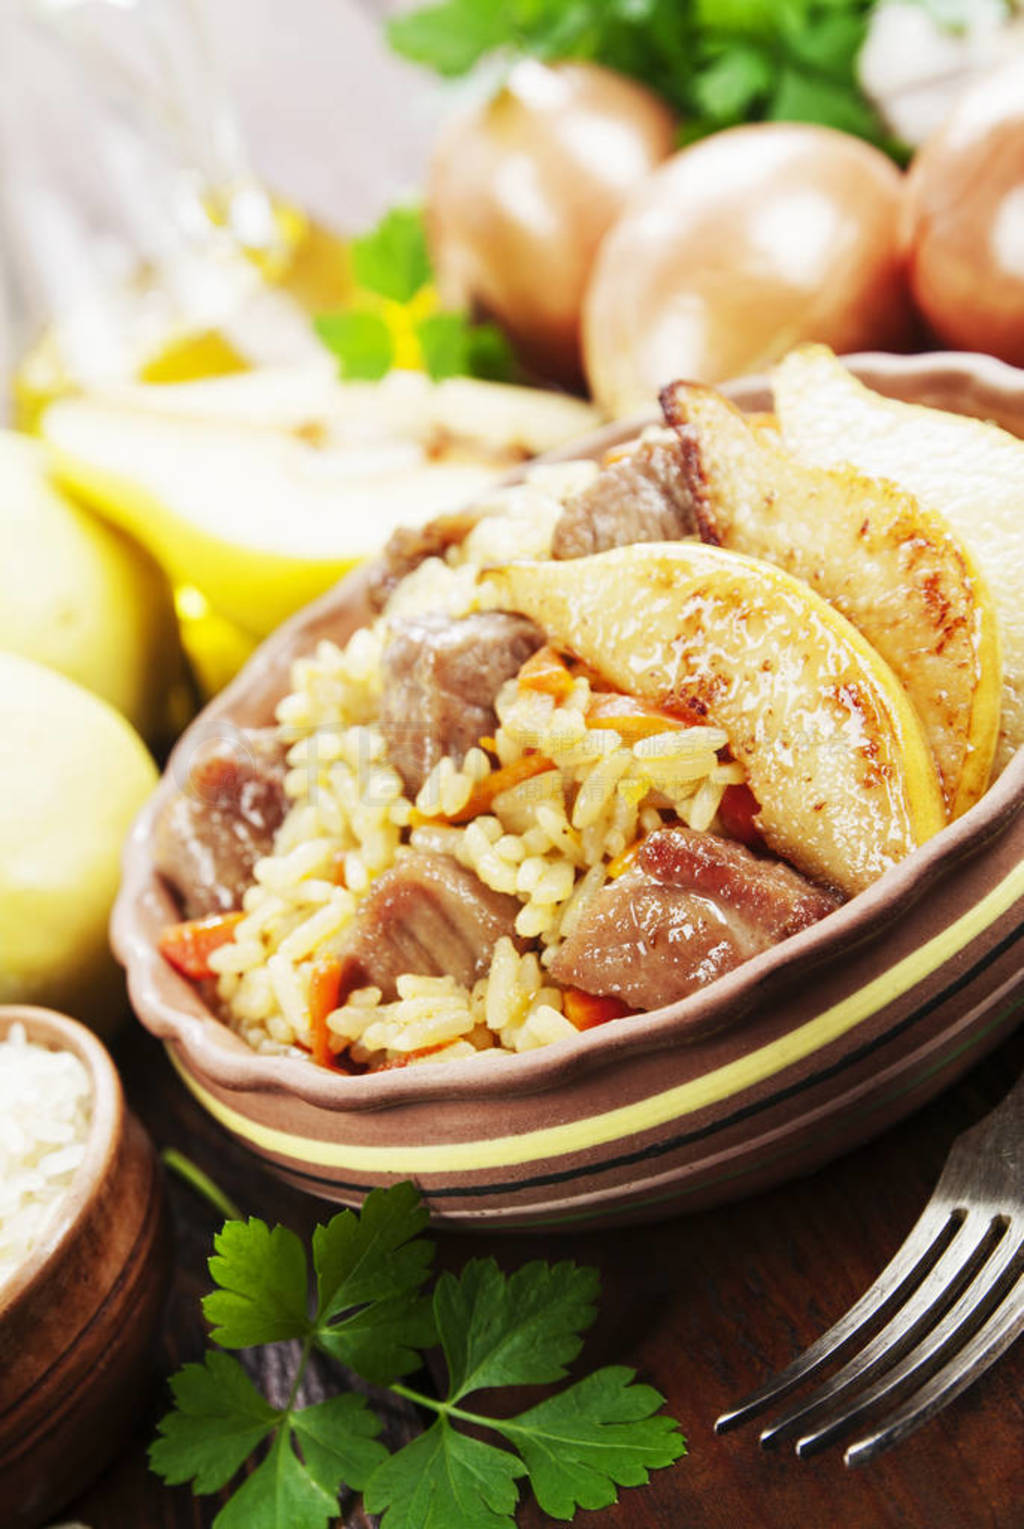 Pilaf with meat and quince